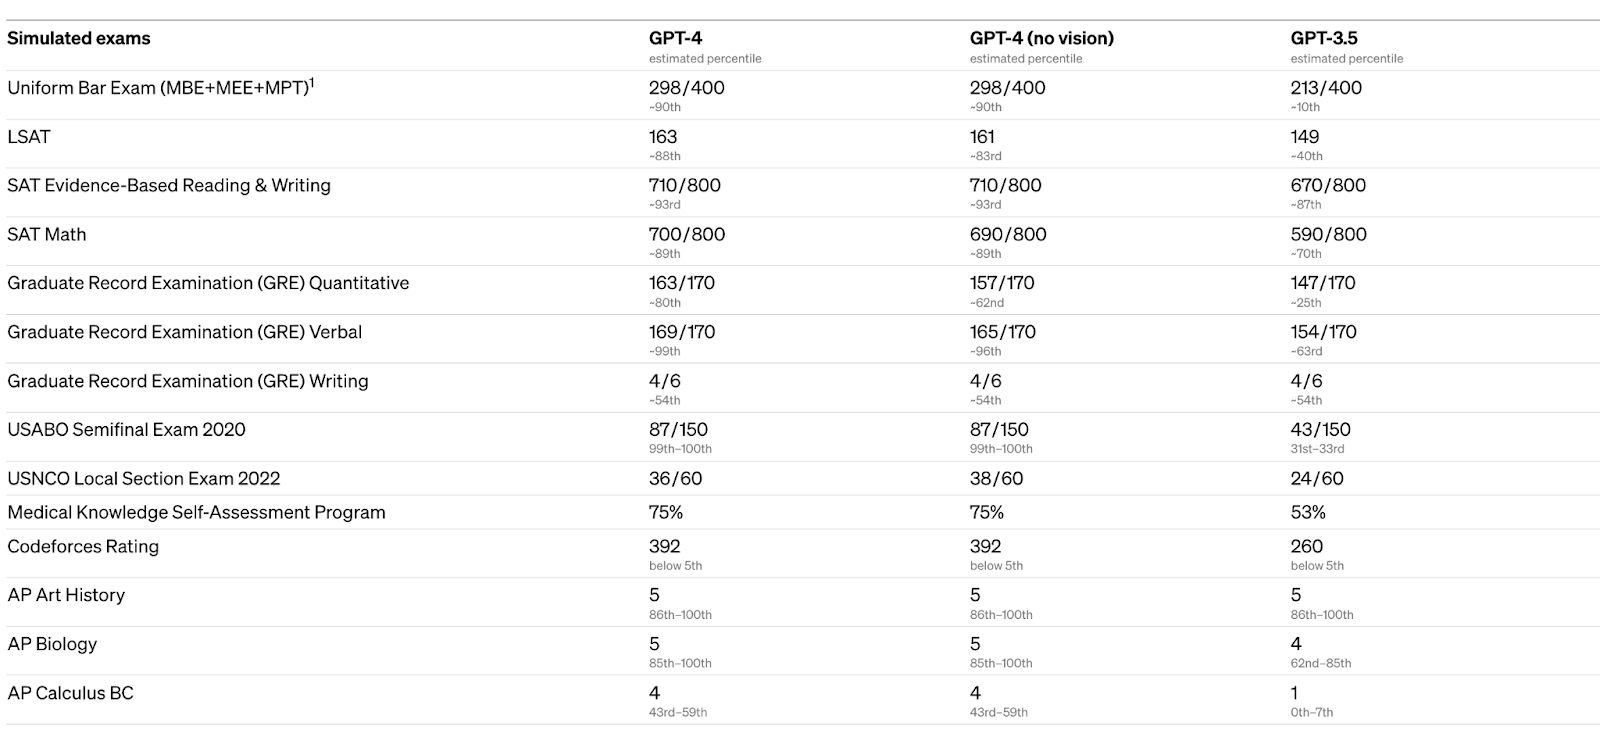 A table comparing the simulated exam results of GPT-4, GPT-4 (no vision), and GPT-3.5. 